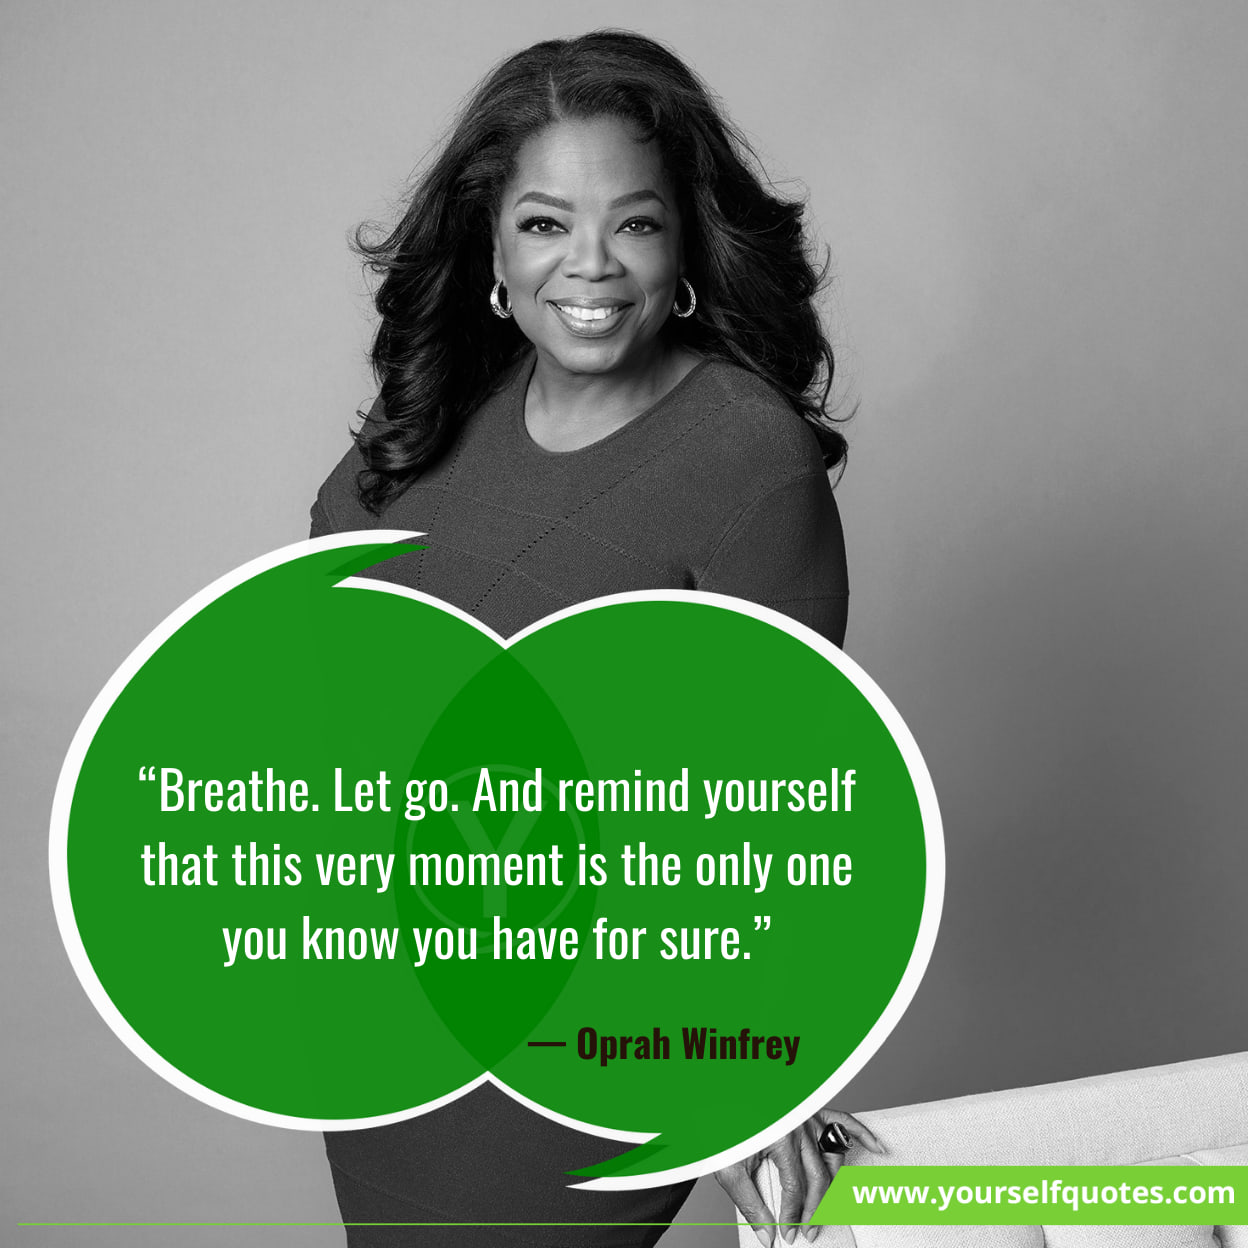 Famous Quotes About Self-Care